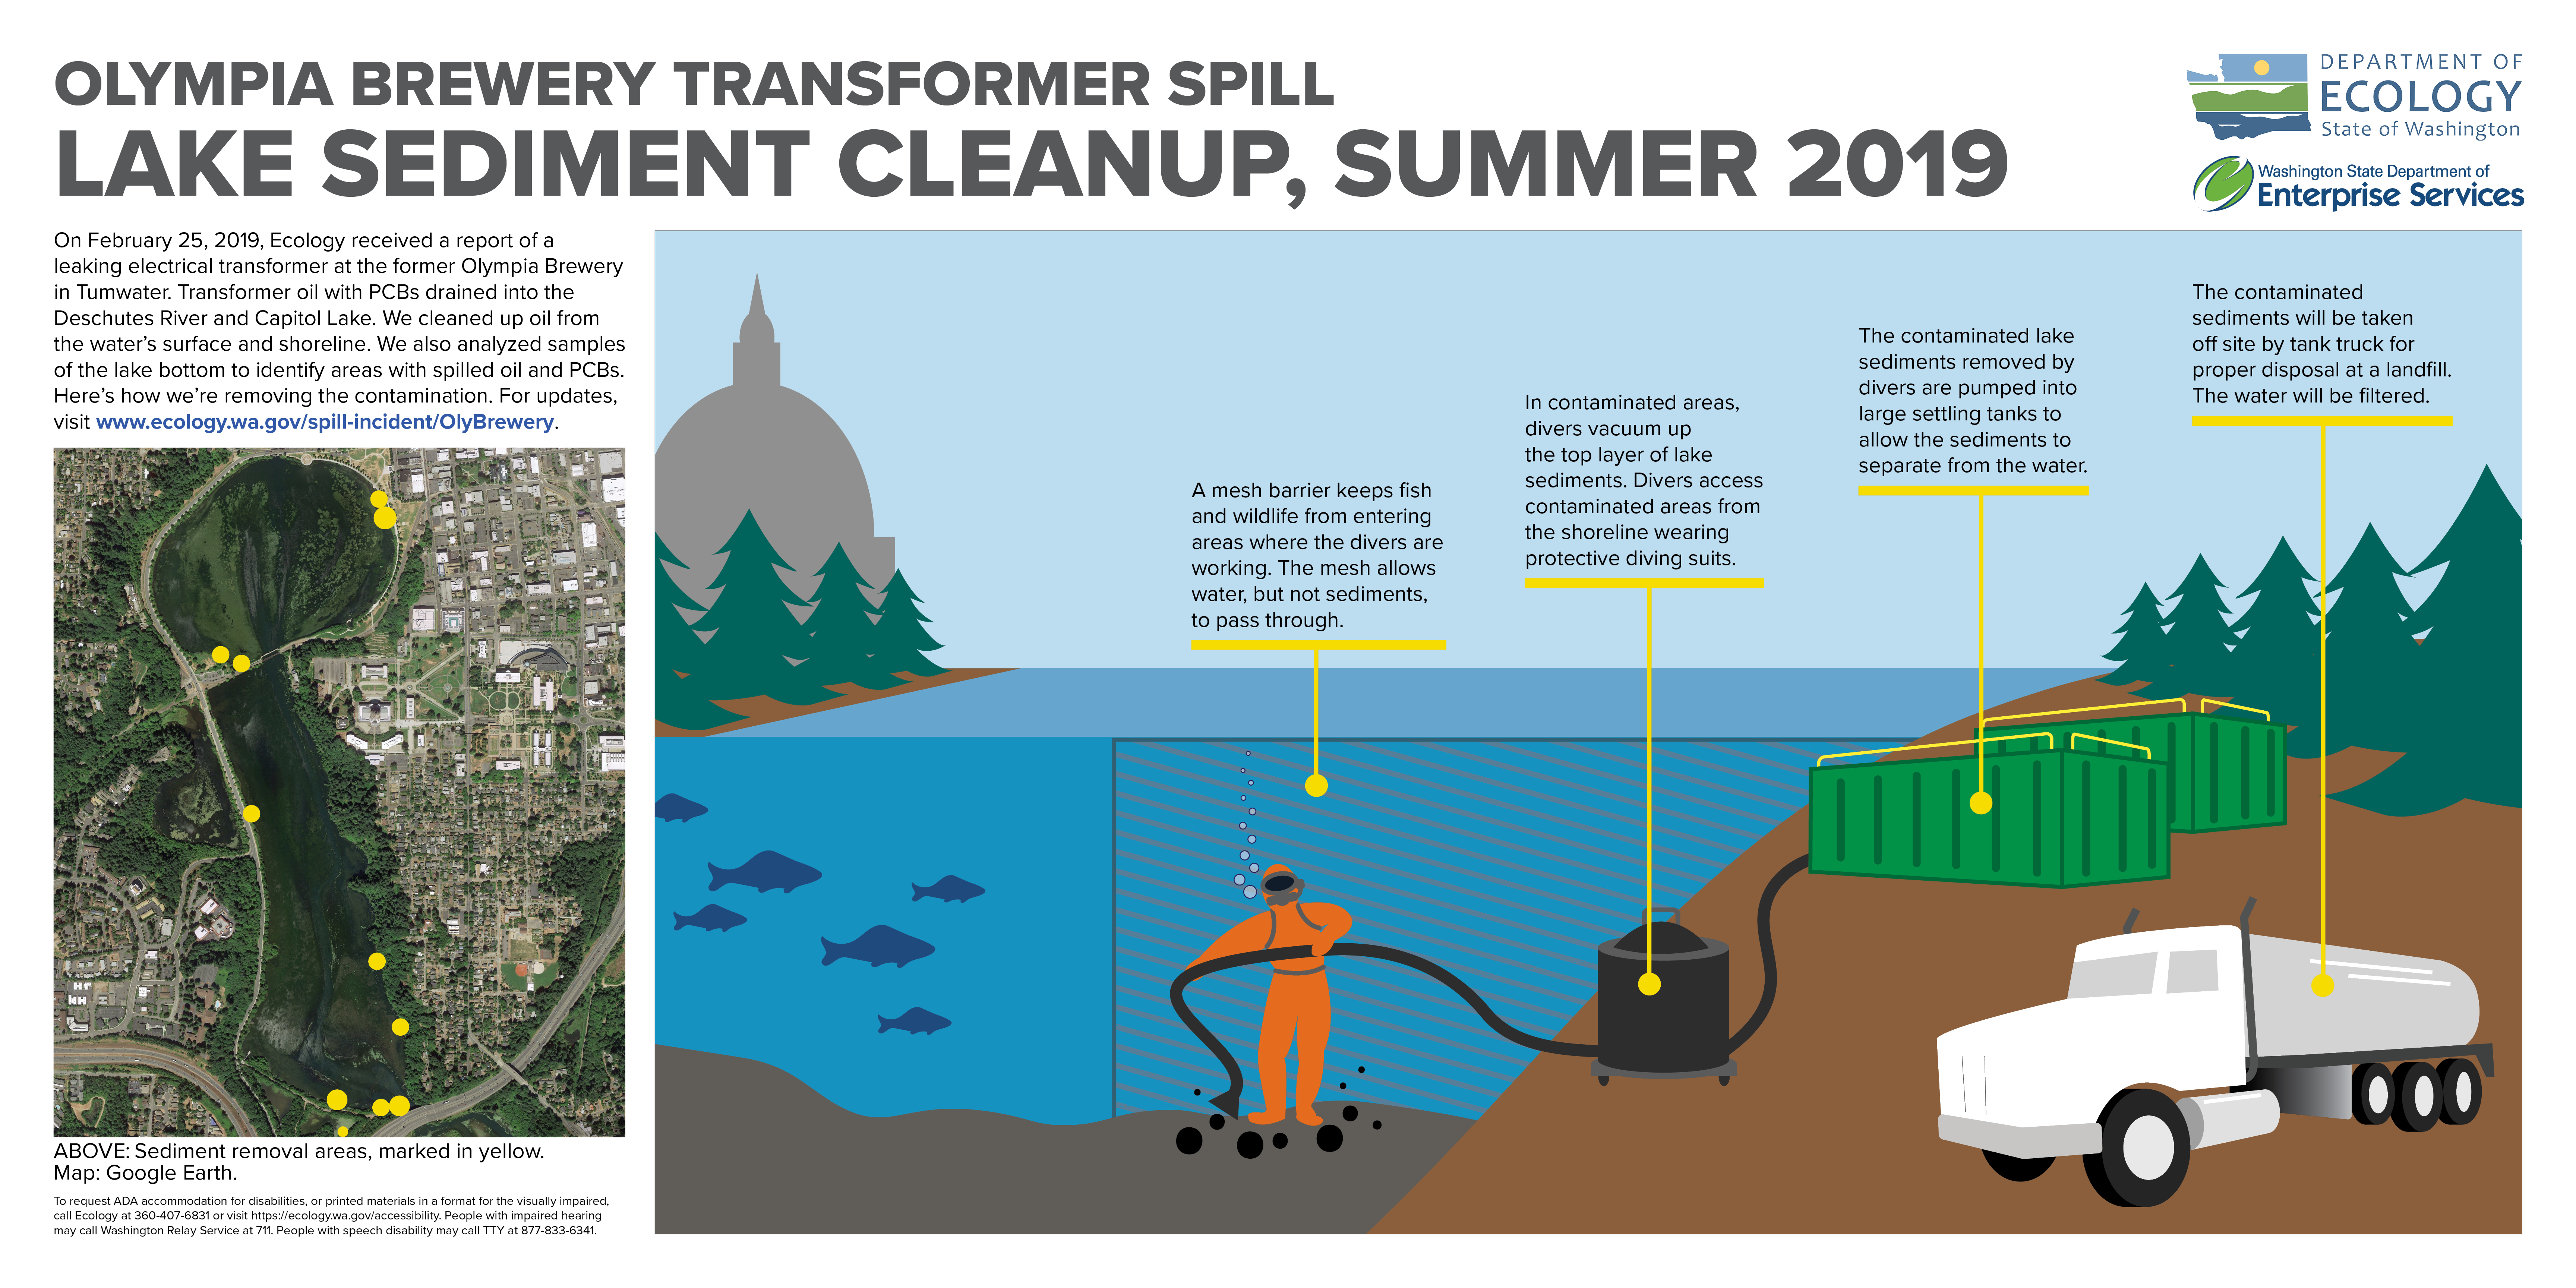 Olympia Brewery Transformer Spill: Lake sediment cleanup, summer 2019